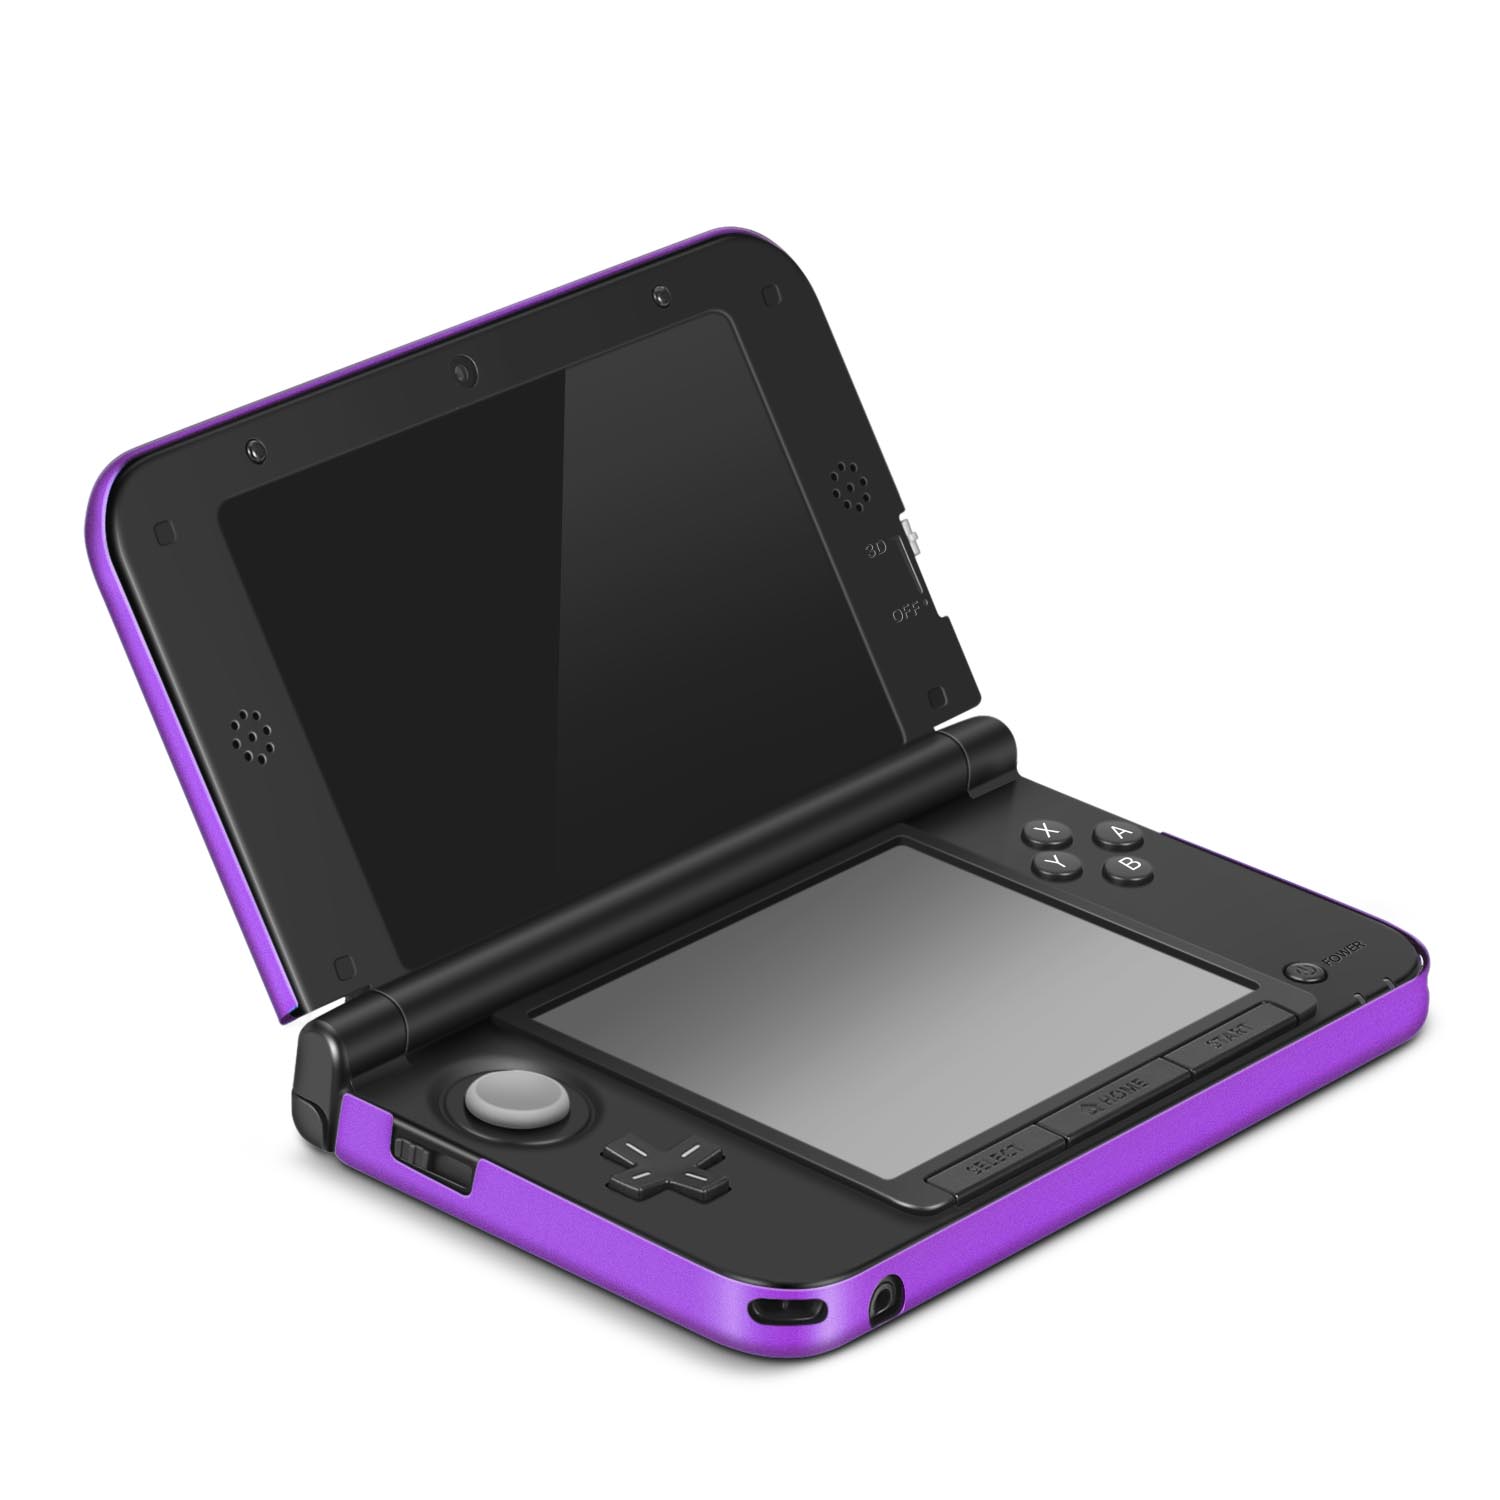 3DS XL LL Case Snap on Hard Shell Body Protective Skin Cover for 2012 Model 815656023910 eBay